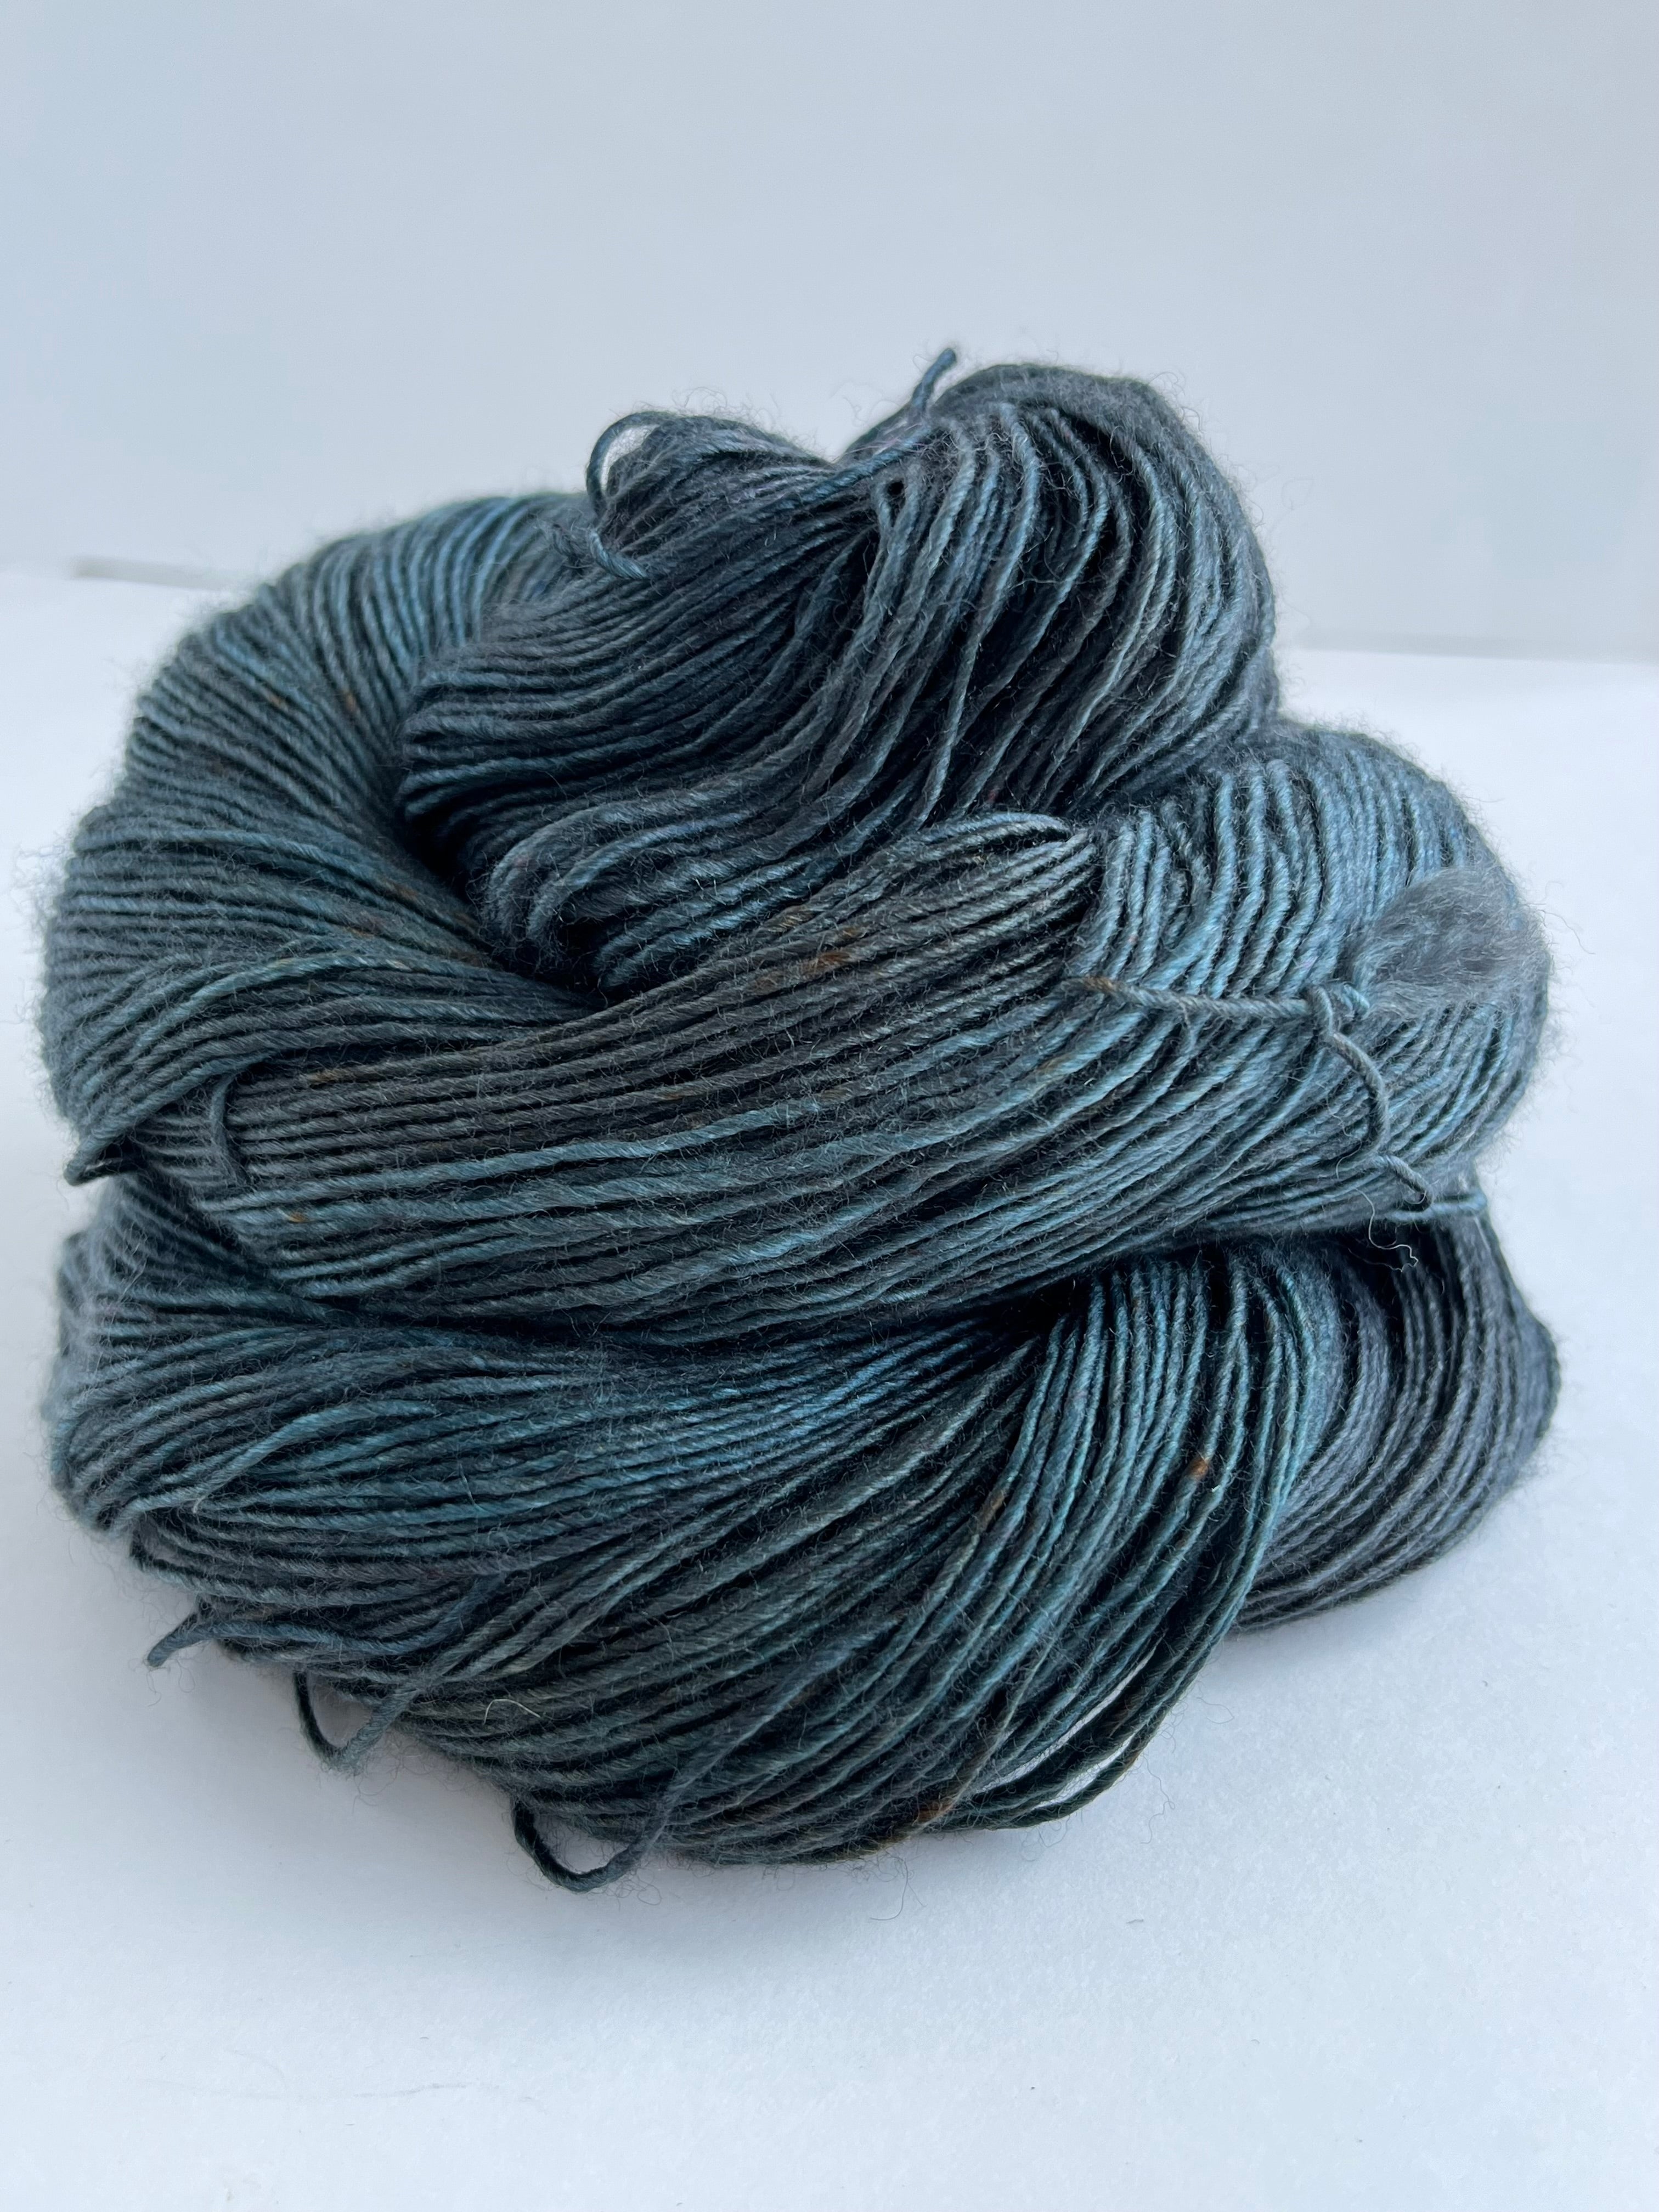 Stormy Sea - River Silk and Merino from Tributary Yarns